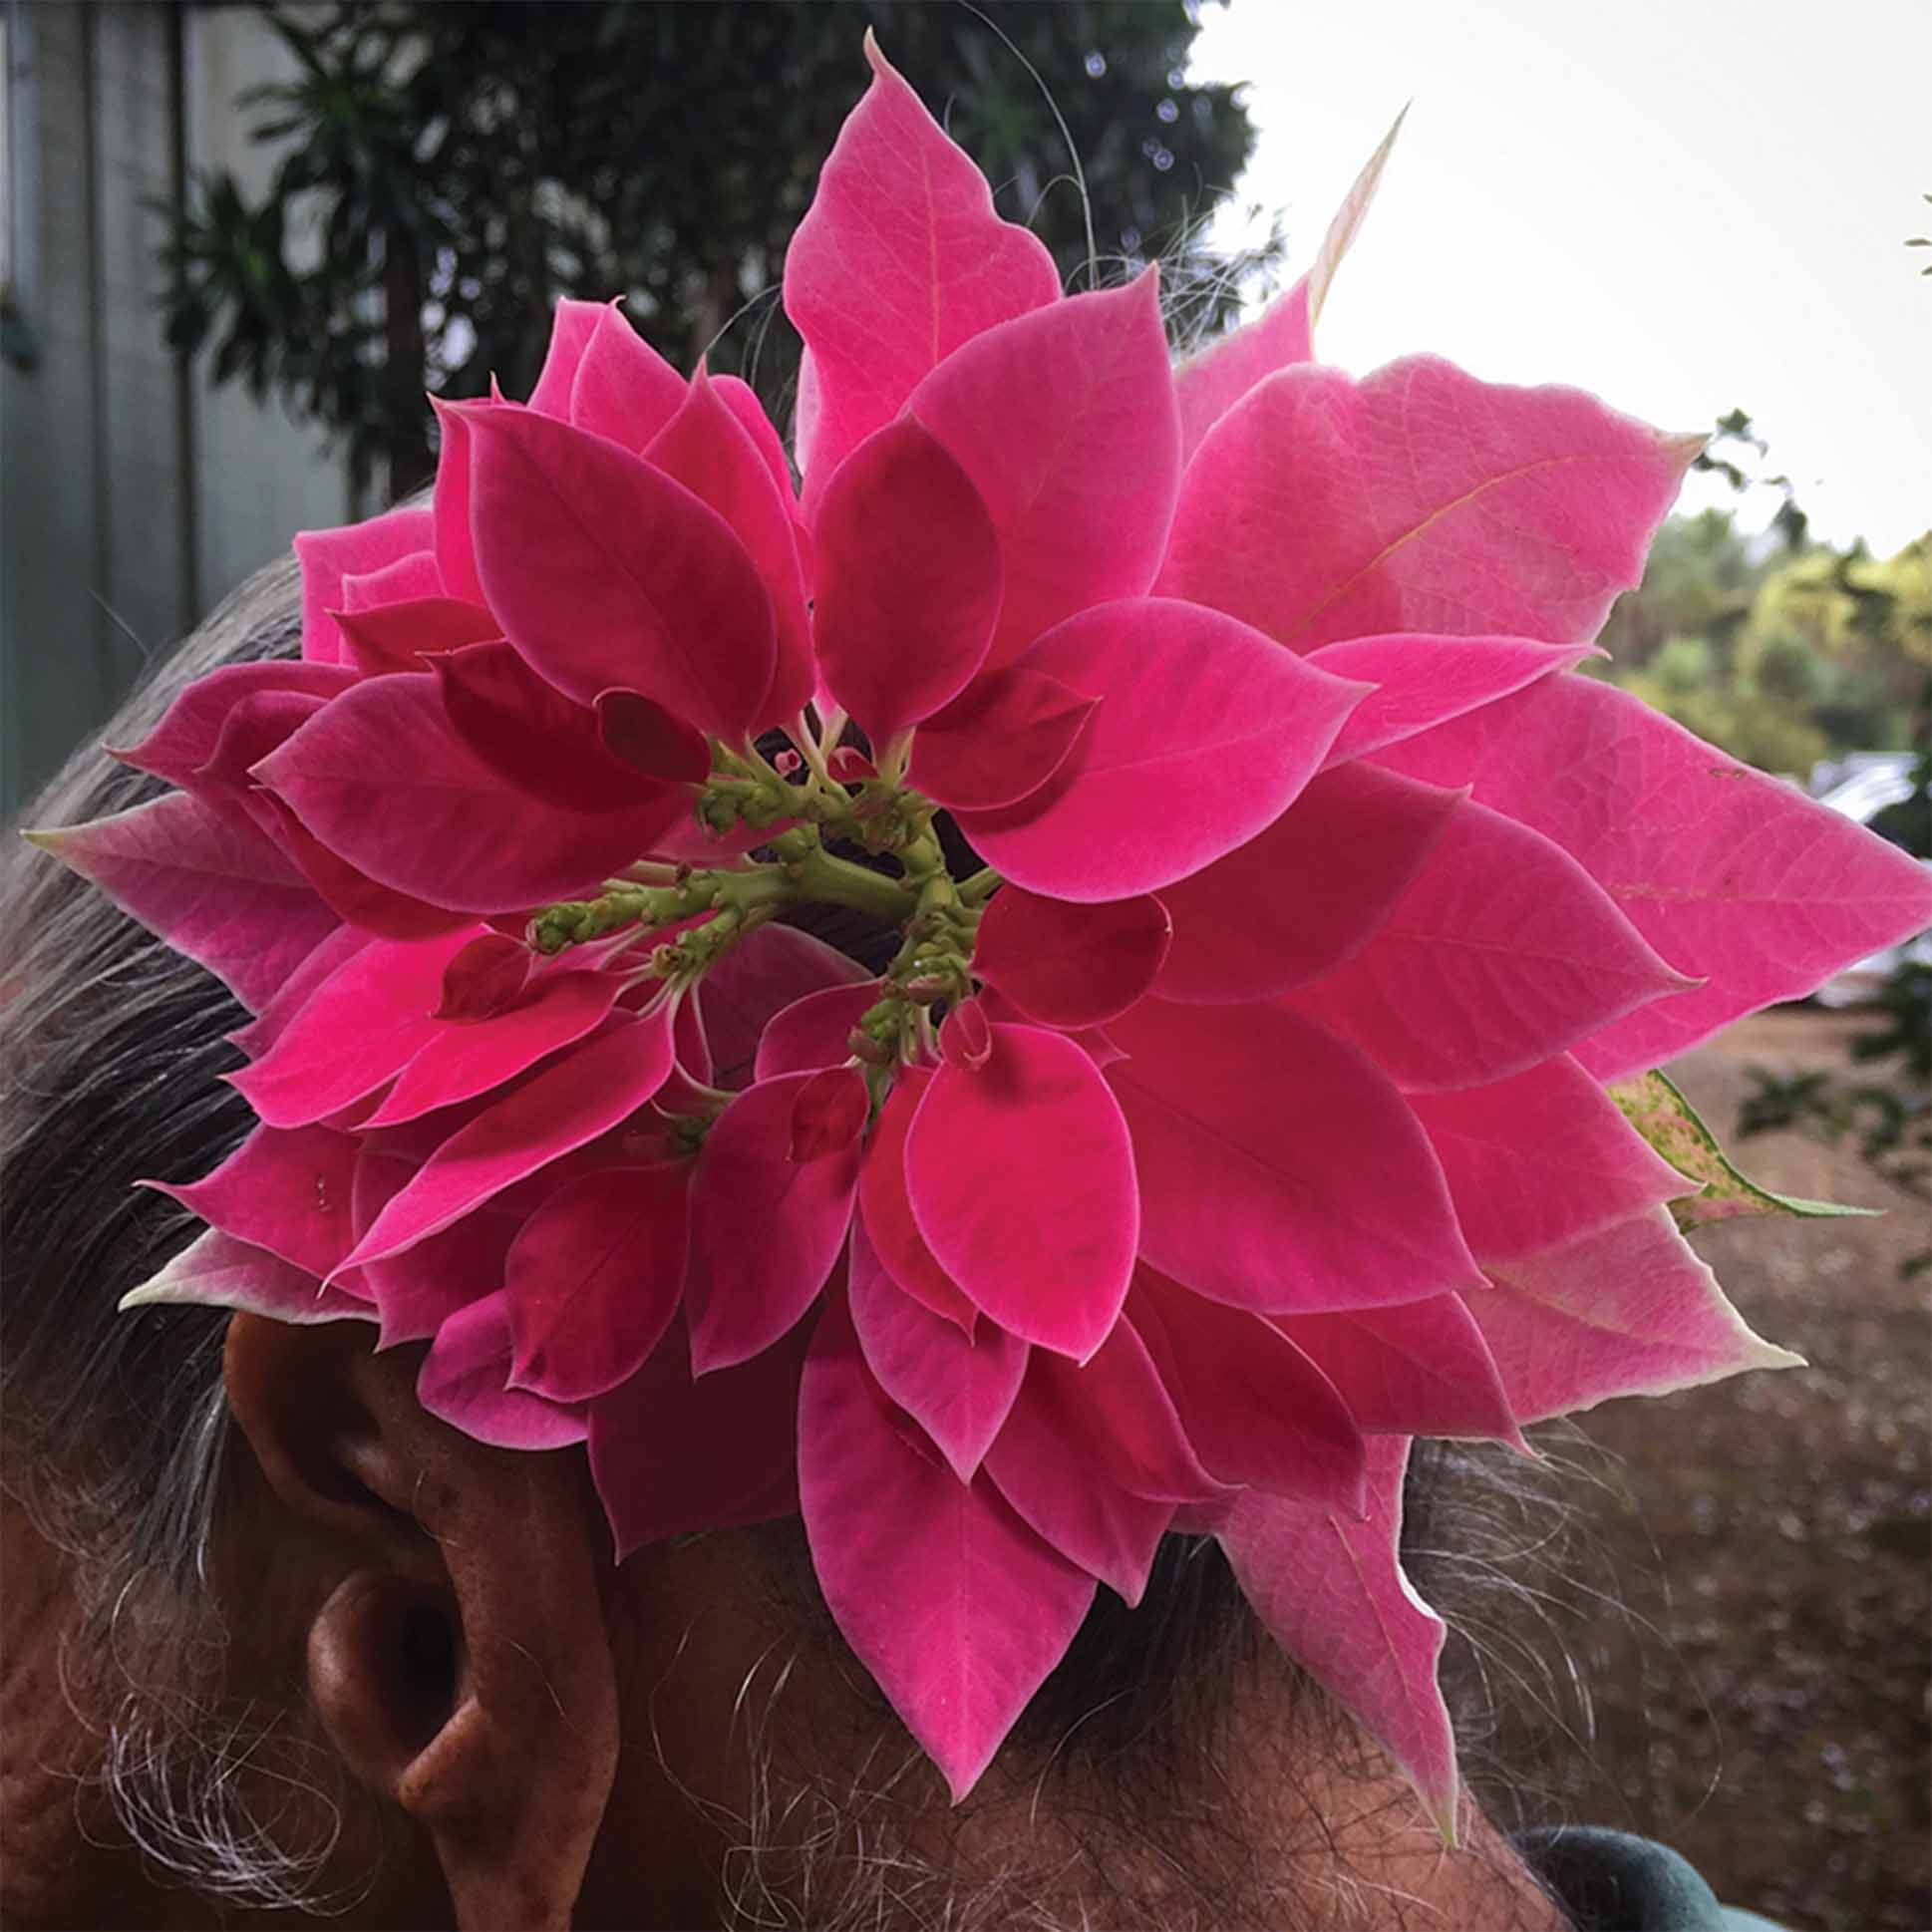 a person with a floral headpiece in a bright magenta color